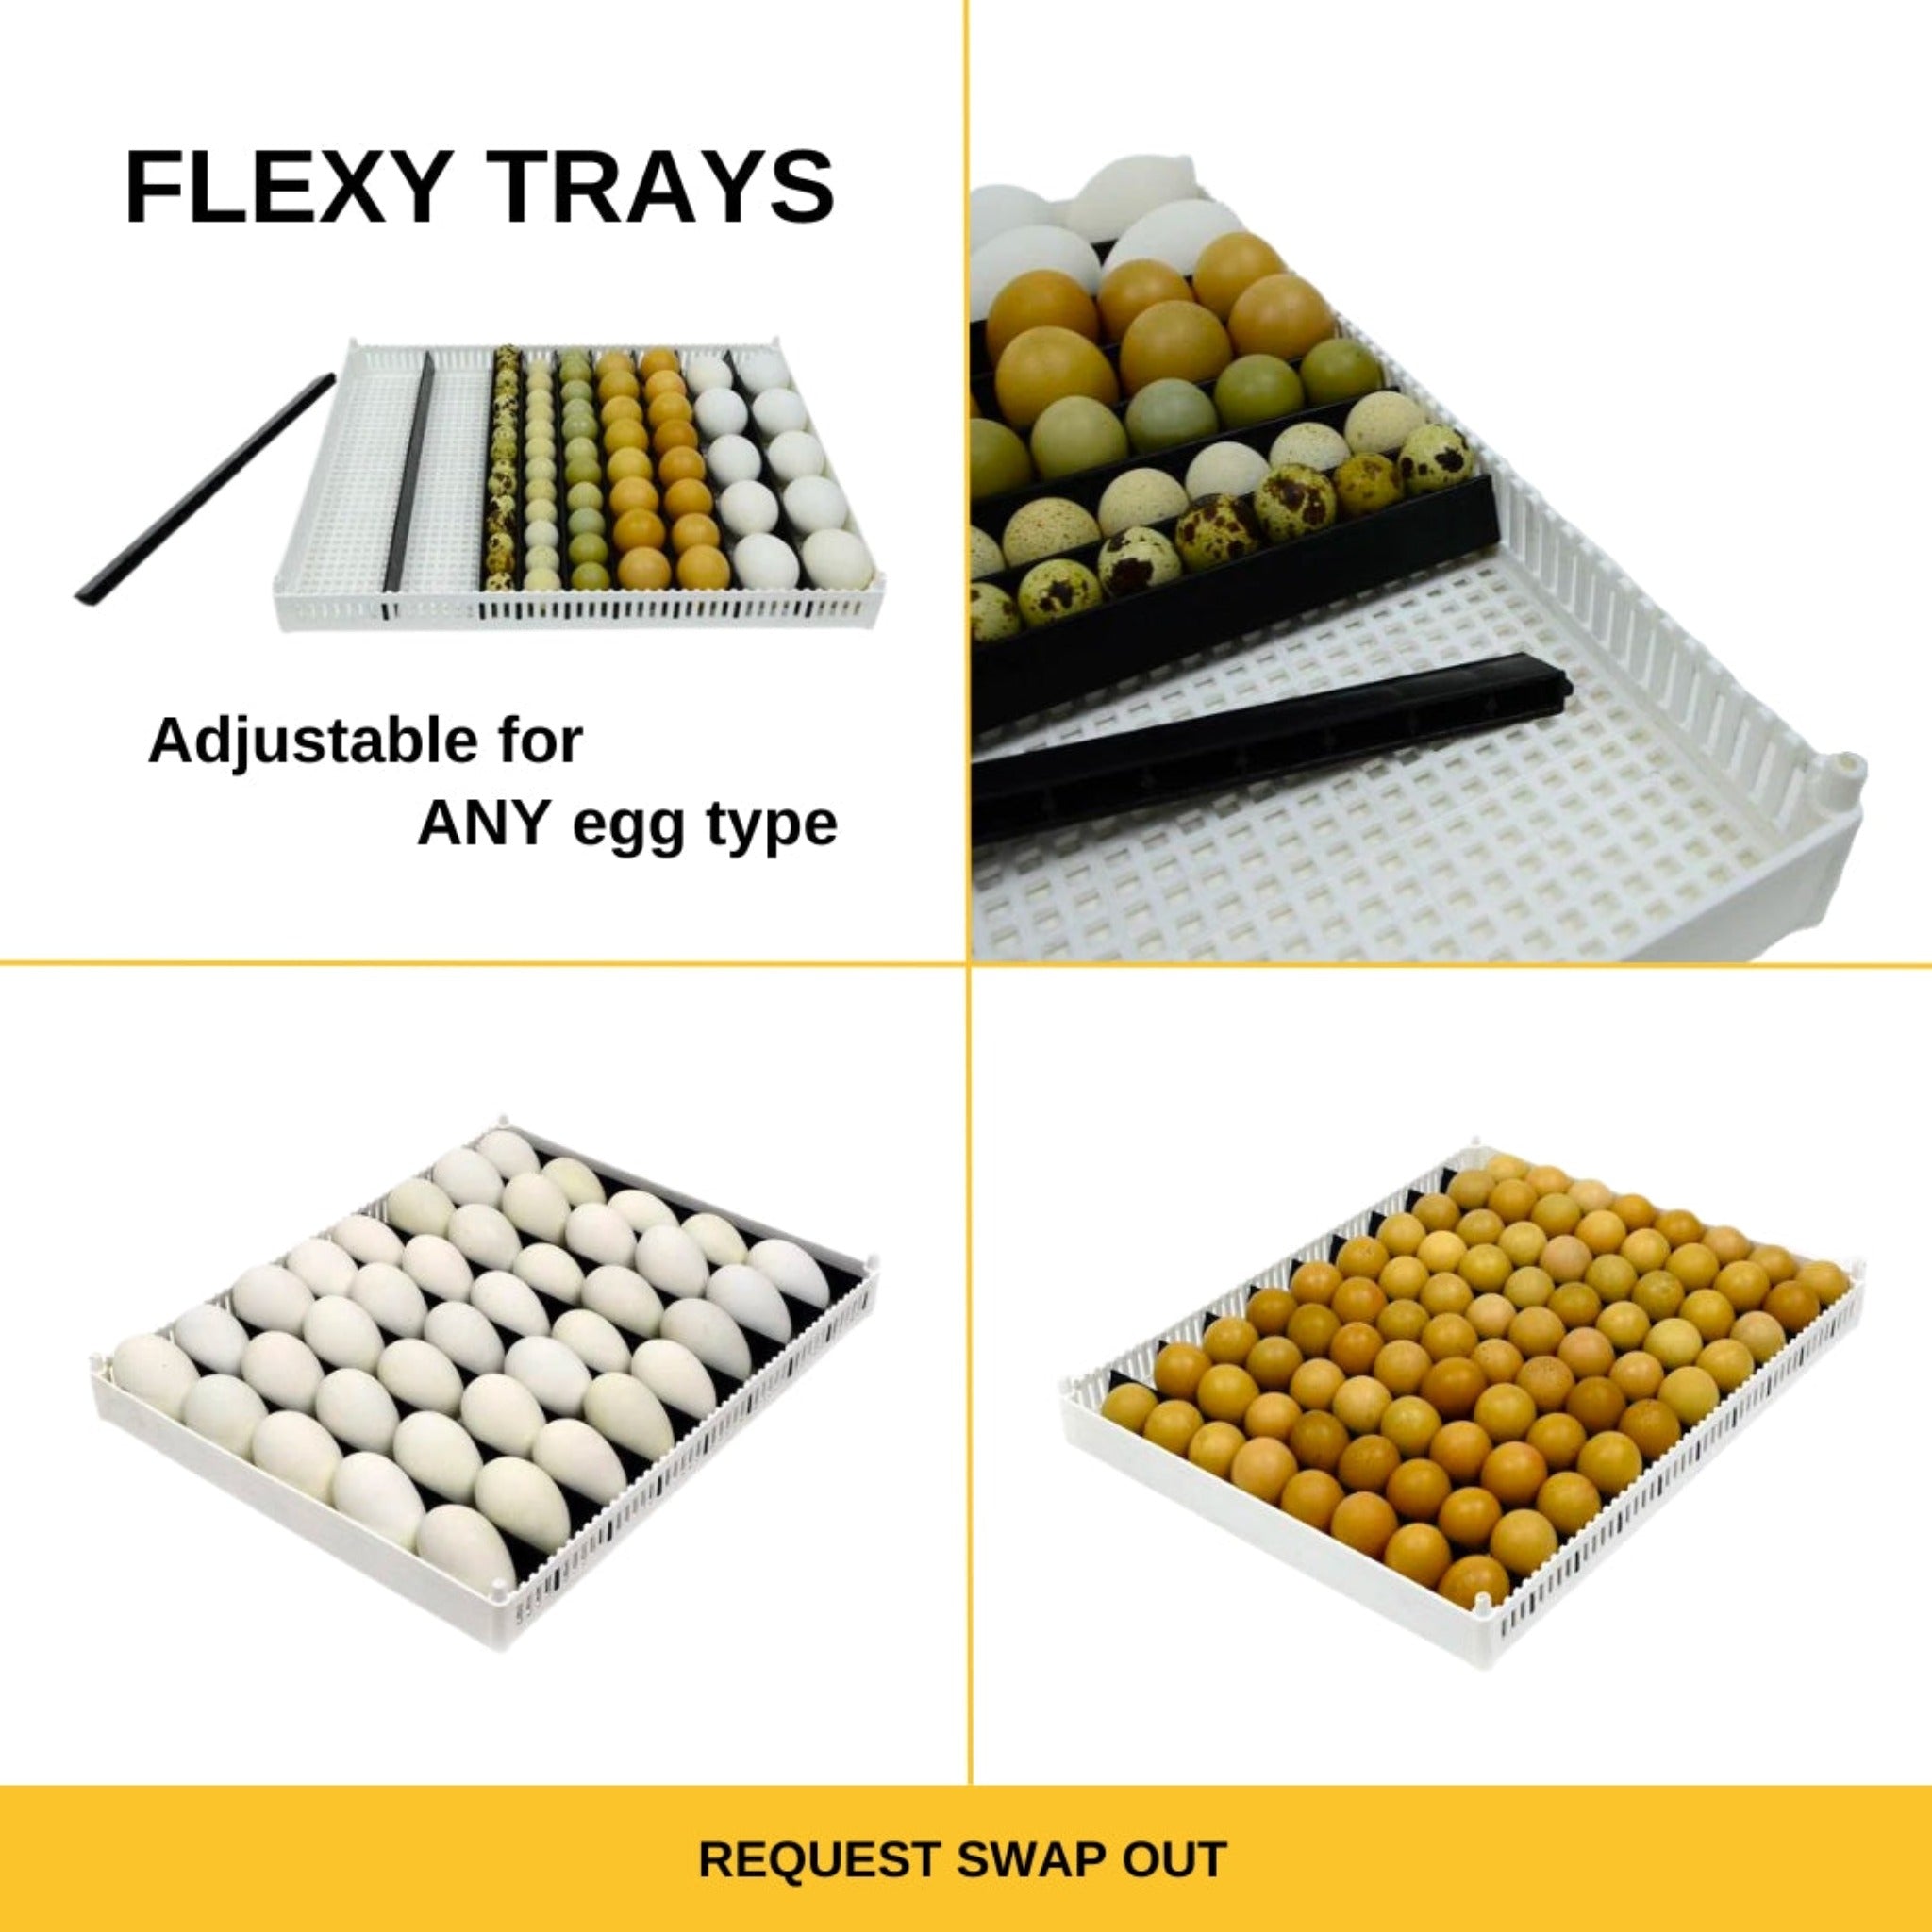 Hatching Time Cimuka. Flexy trays shown in image. Multiple types of eggs are shown inside the tray to show how you can use flexy trays to hatch various types of poultry. Text reads Adjustable for ANY egg type.